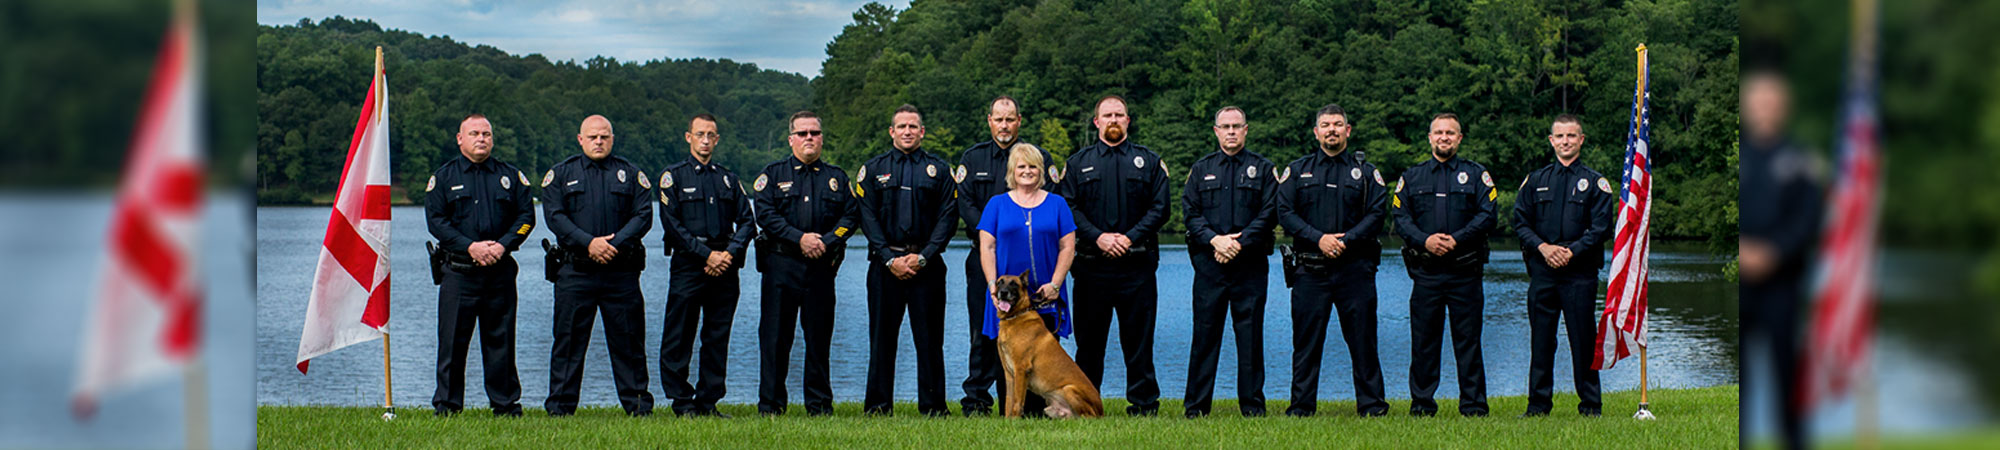 police officers and police dog lined up in front of lake